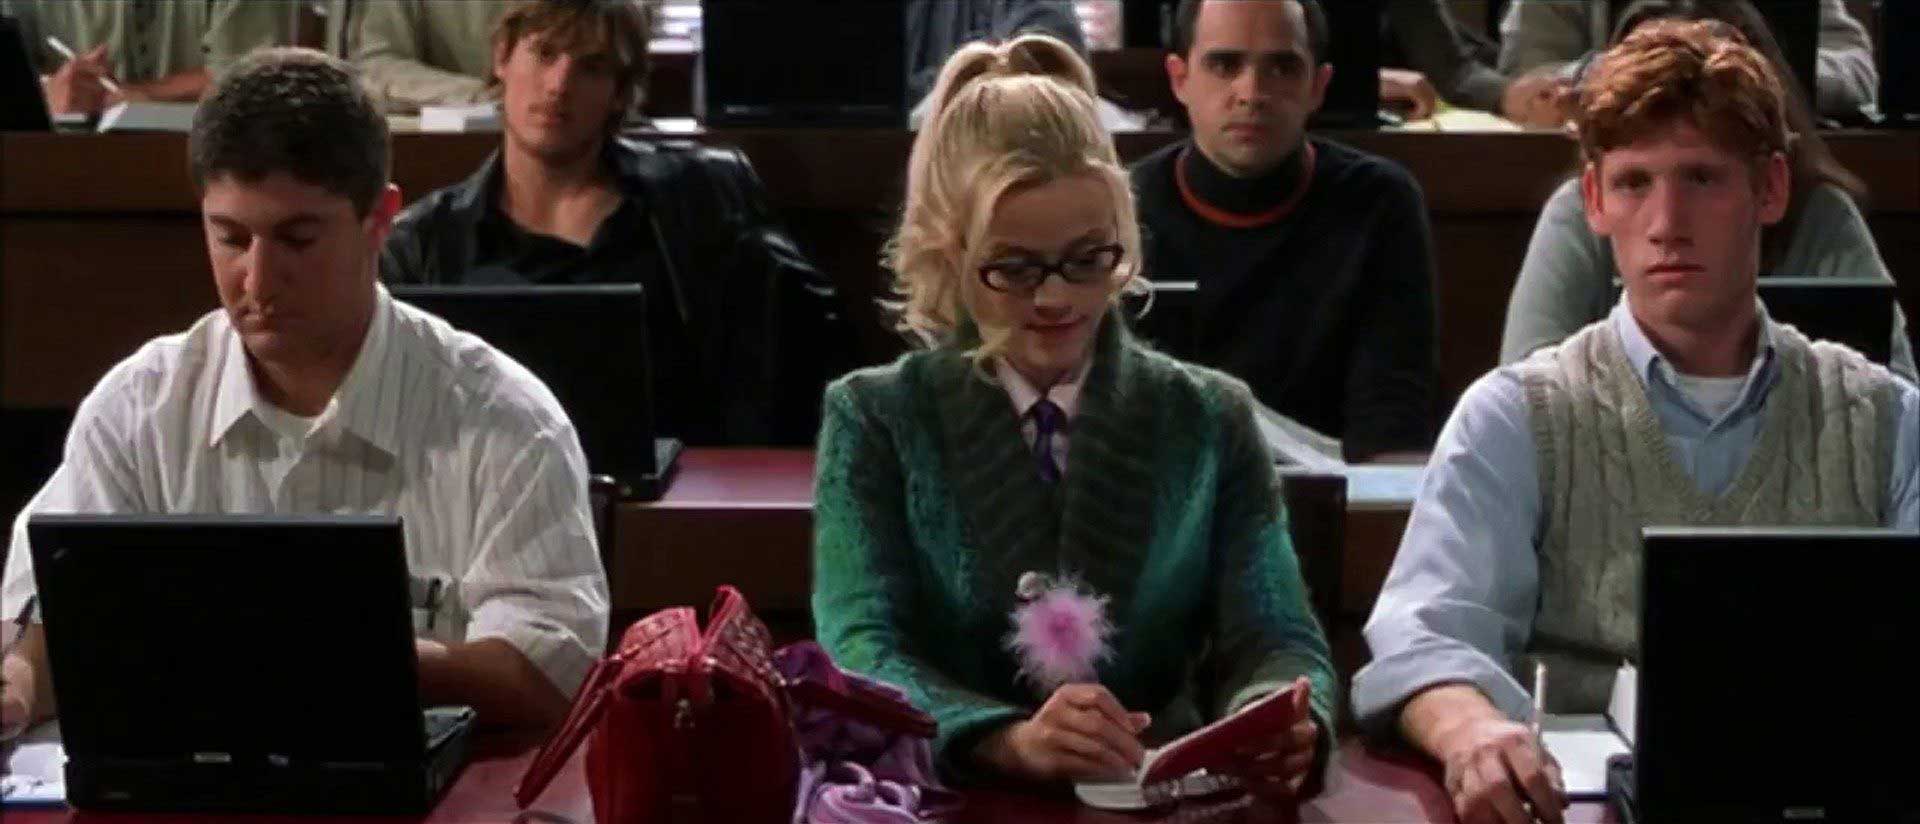 Legally blonde, taking notes, movie screen grab